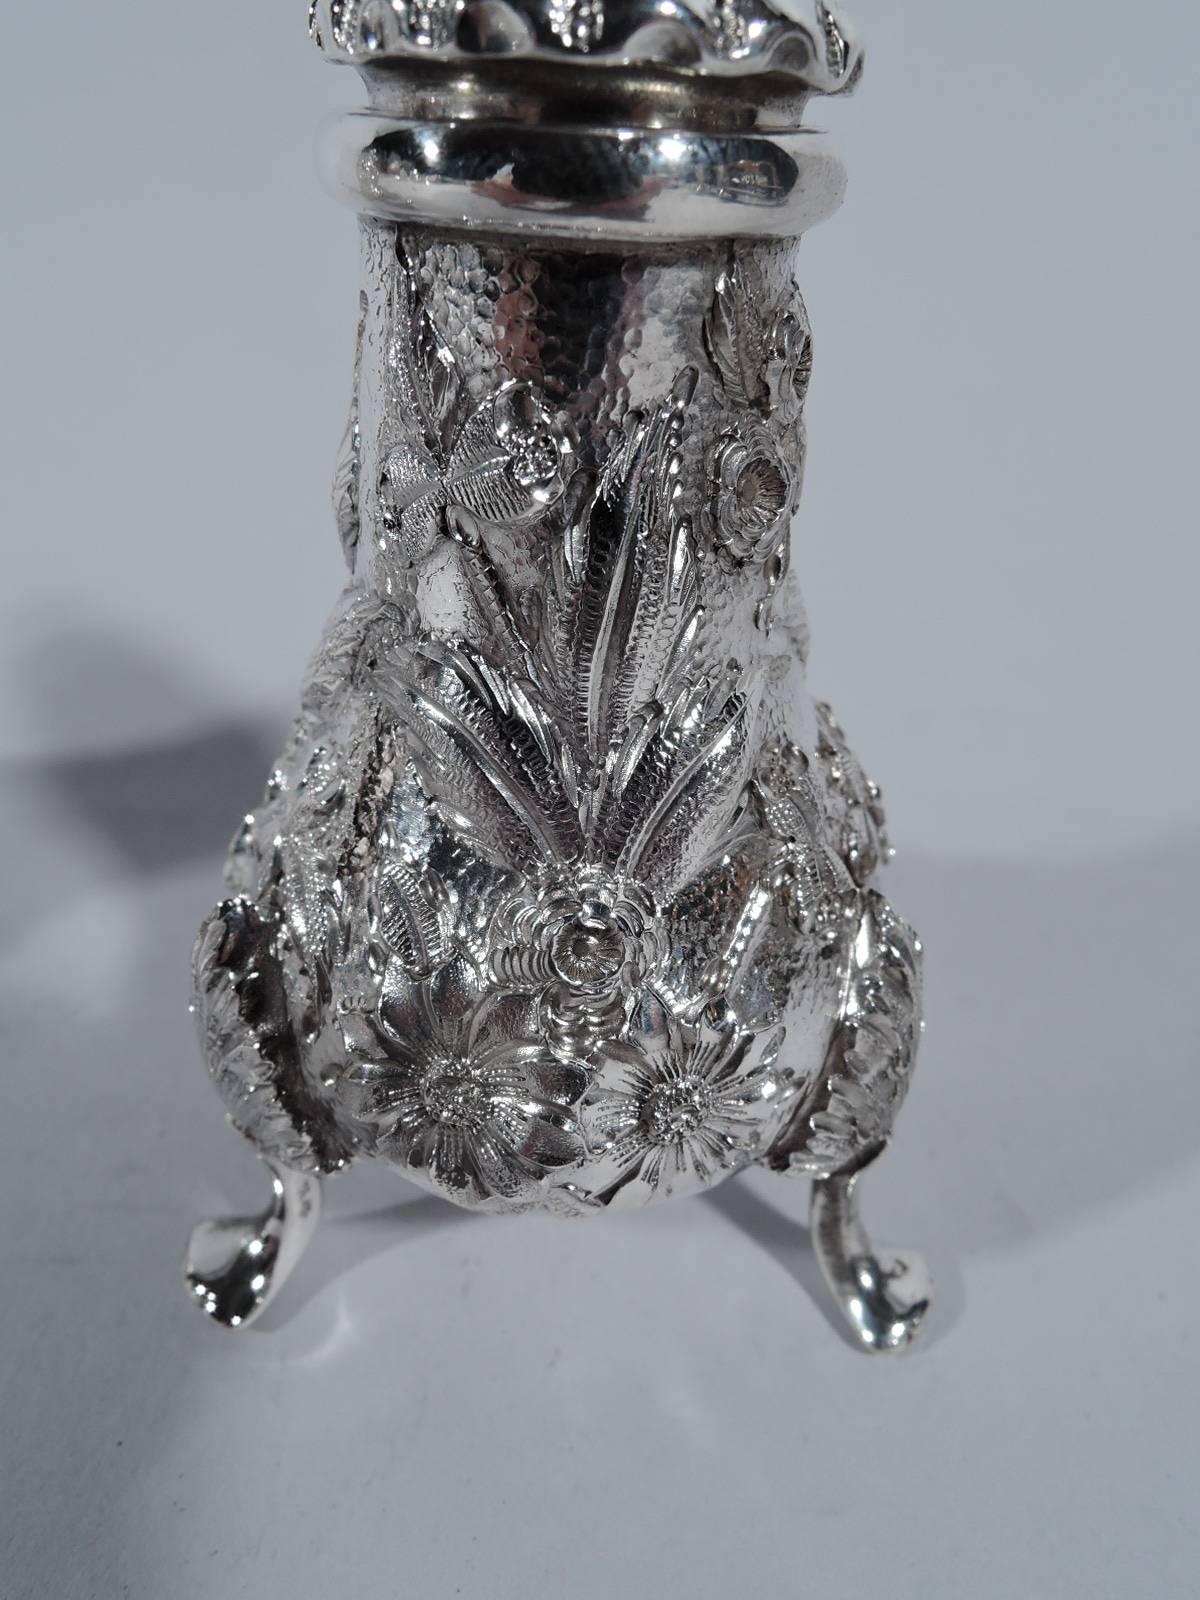 American Pair of Pretty Repousse Sterling Silver Salt and Pepper Shakers by Kirk